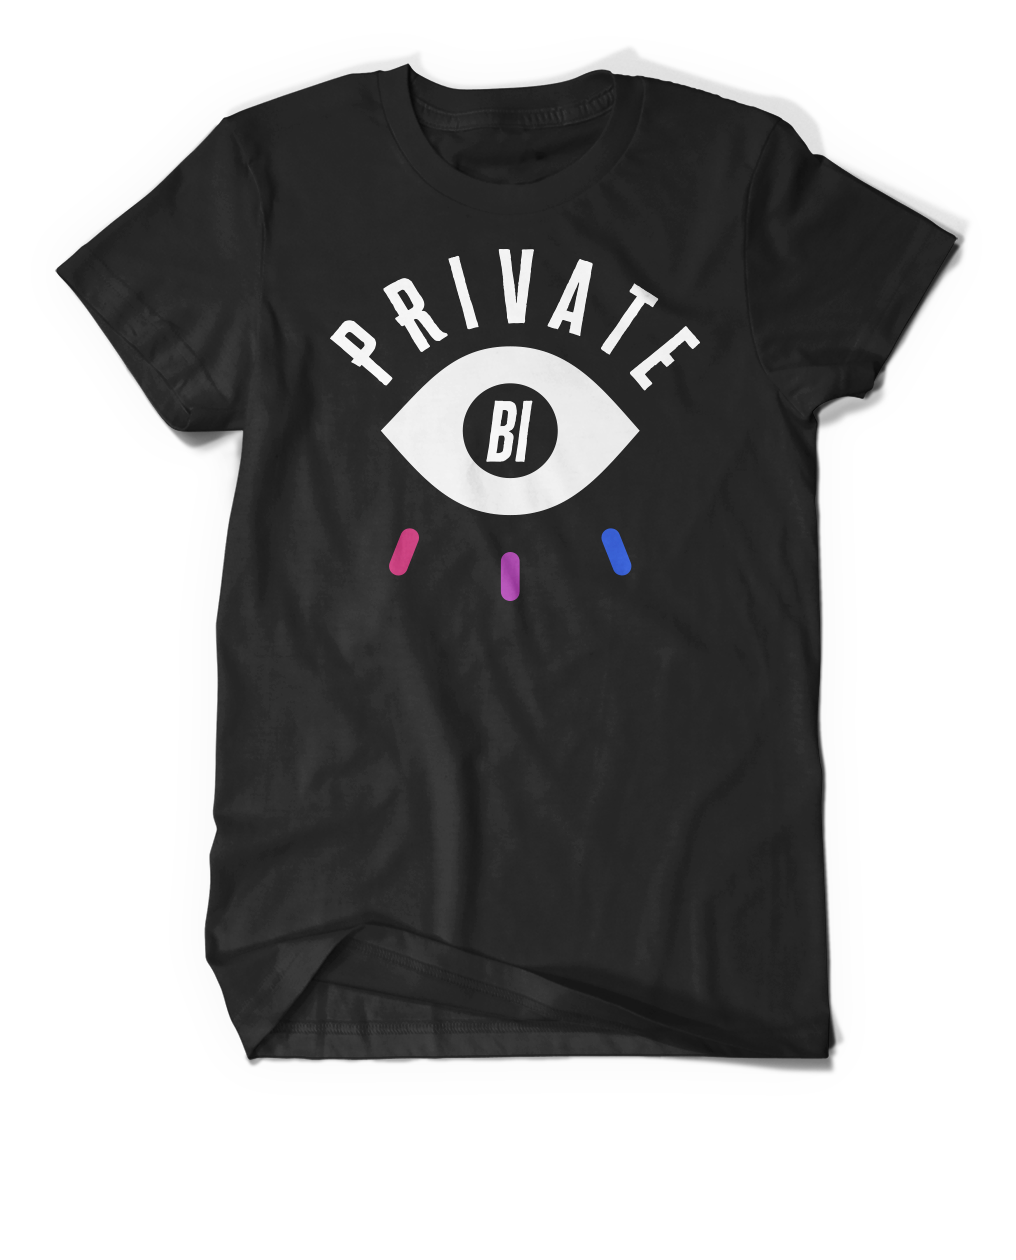 A black t-shirt with the word "Private" arced across the top. Right below that is the outline of an eye with the word "BI" written in the center. Below are three short colorful lines pointing away from the eye. From the Penumbra Podcast. 